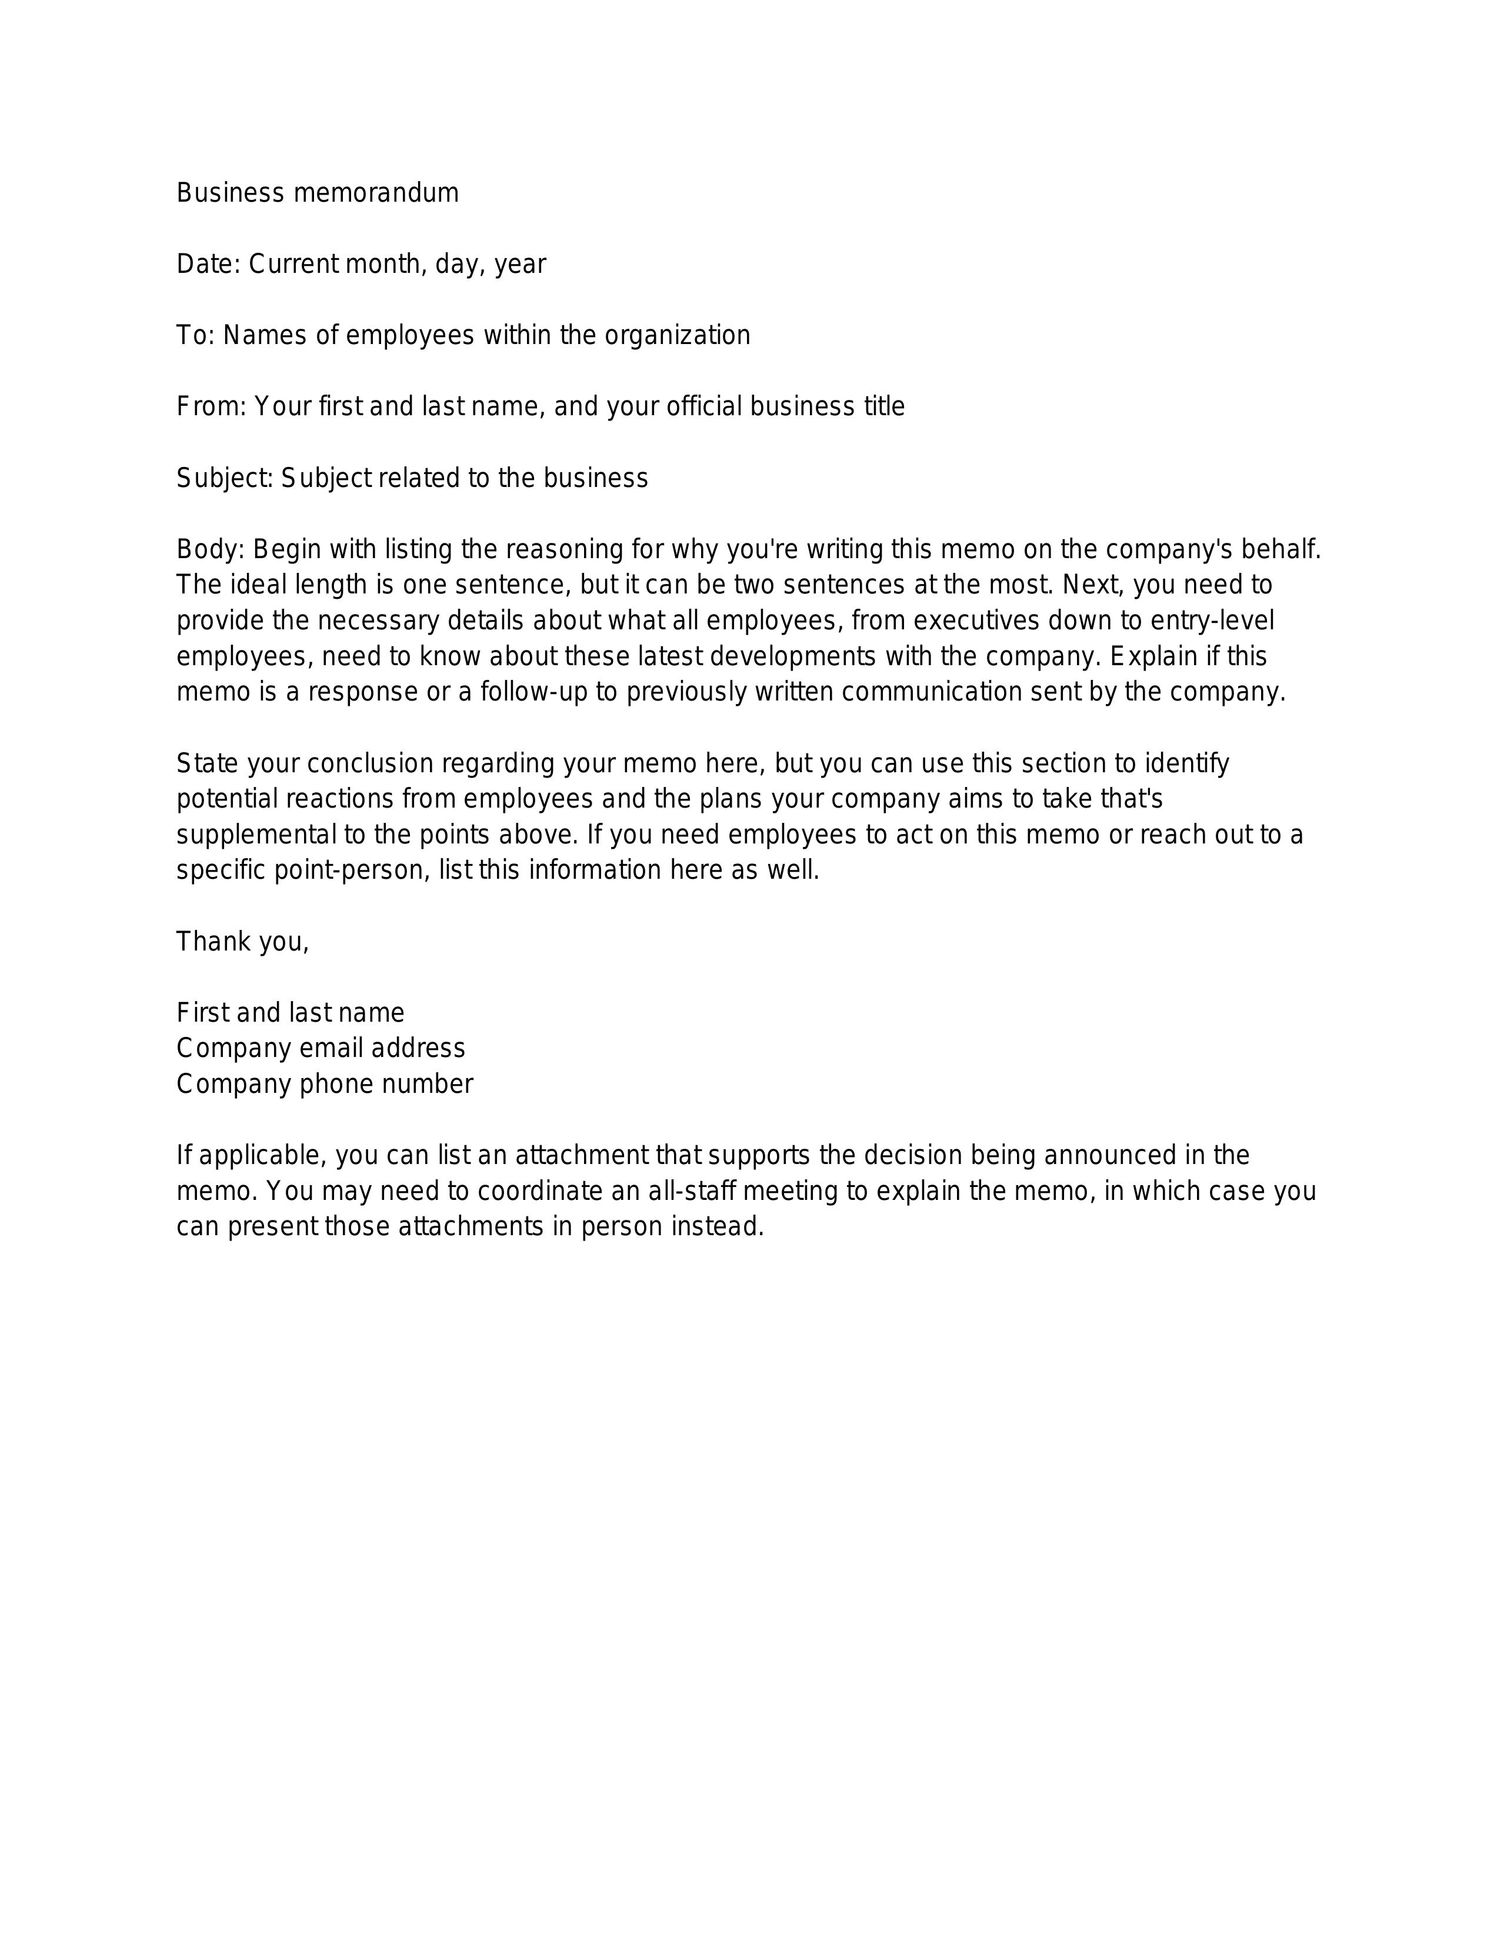 How To Write A Business Memo With Template And Examples 9820